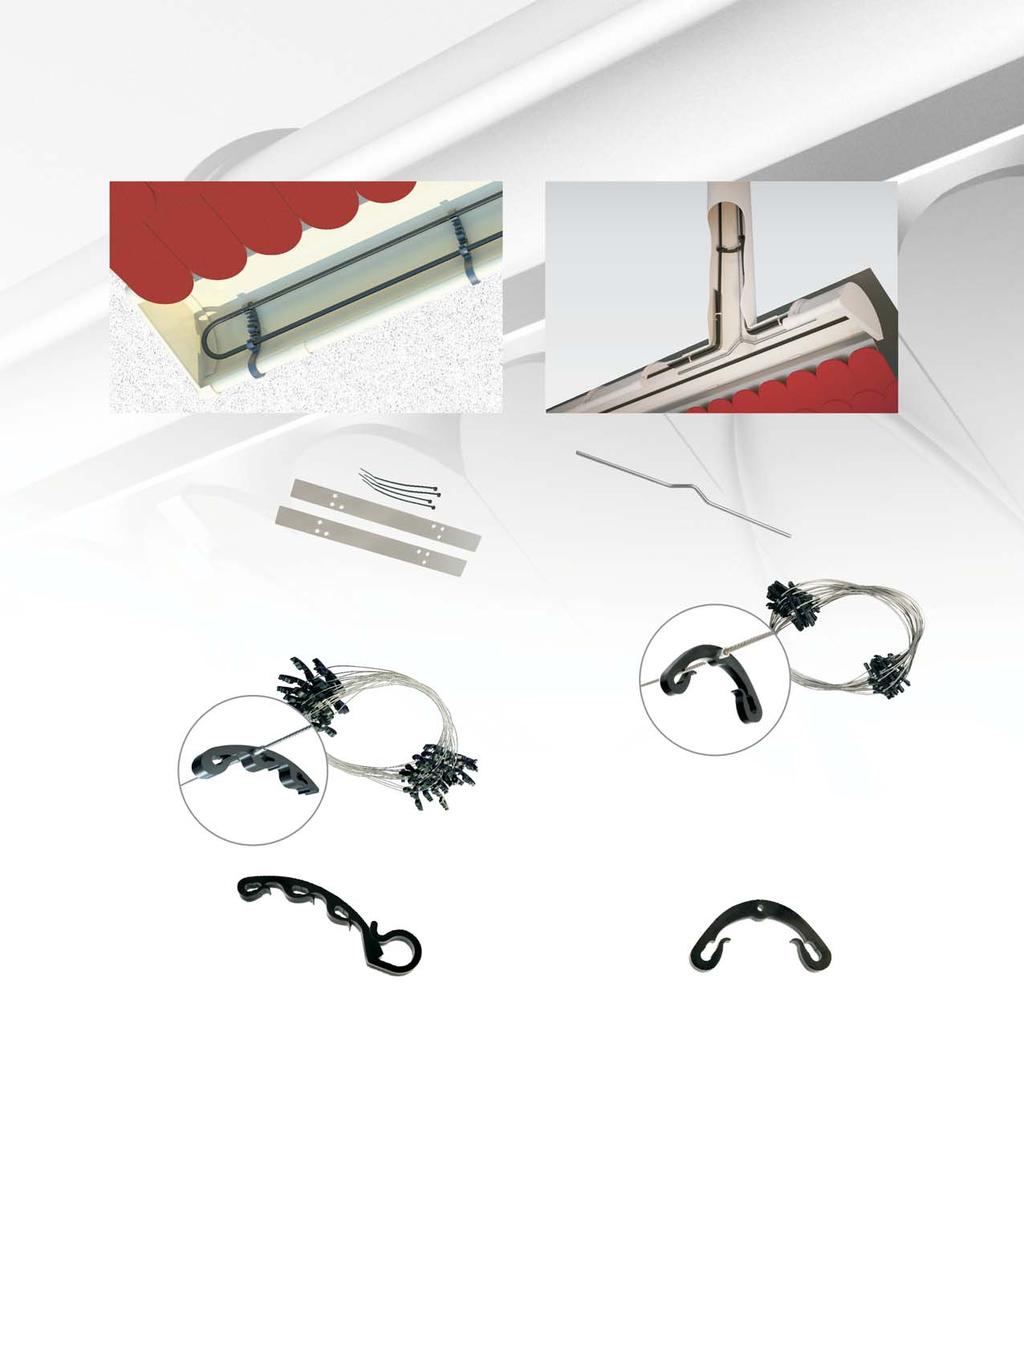 Heating cable fixing in gutters and roof troughs Gutters Heating cables can be fixed to gutters and downpipes in either of the two following ways: with holders or spacing wire with clips.